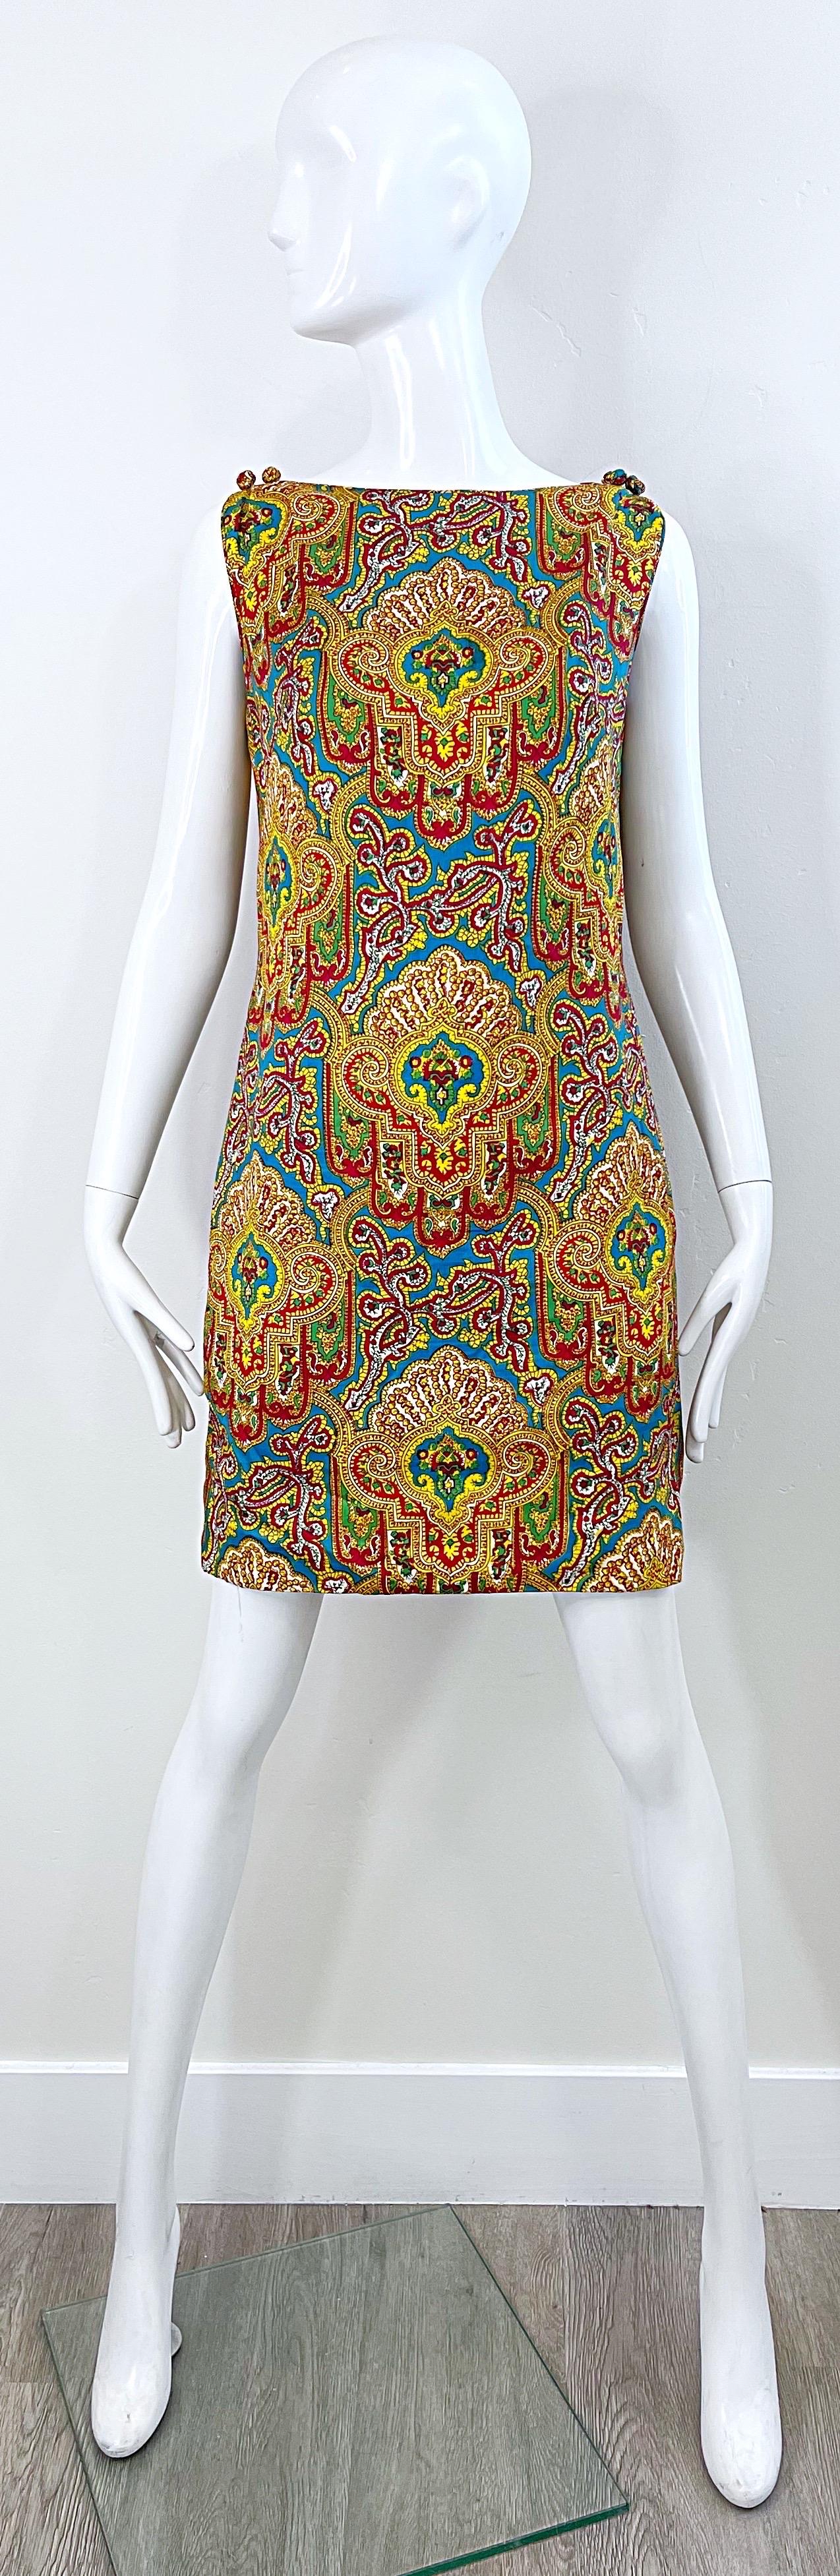 Chic 1960s DYNASTY paisley bright colorful silk sleeveless shift dress ! Features a tailored bodice, with hidden metal zipper up the back and hook-and-eye closure. POCKETS at each side of the hips. Two fabric covered mock buttons at each shoulder.